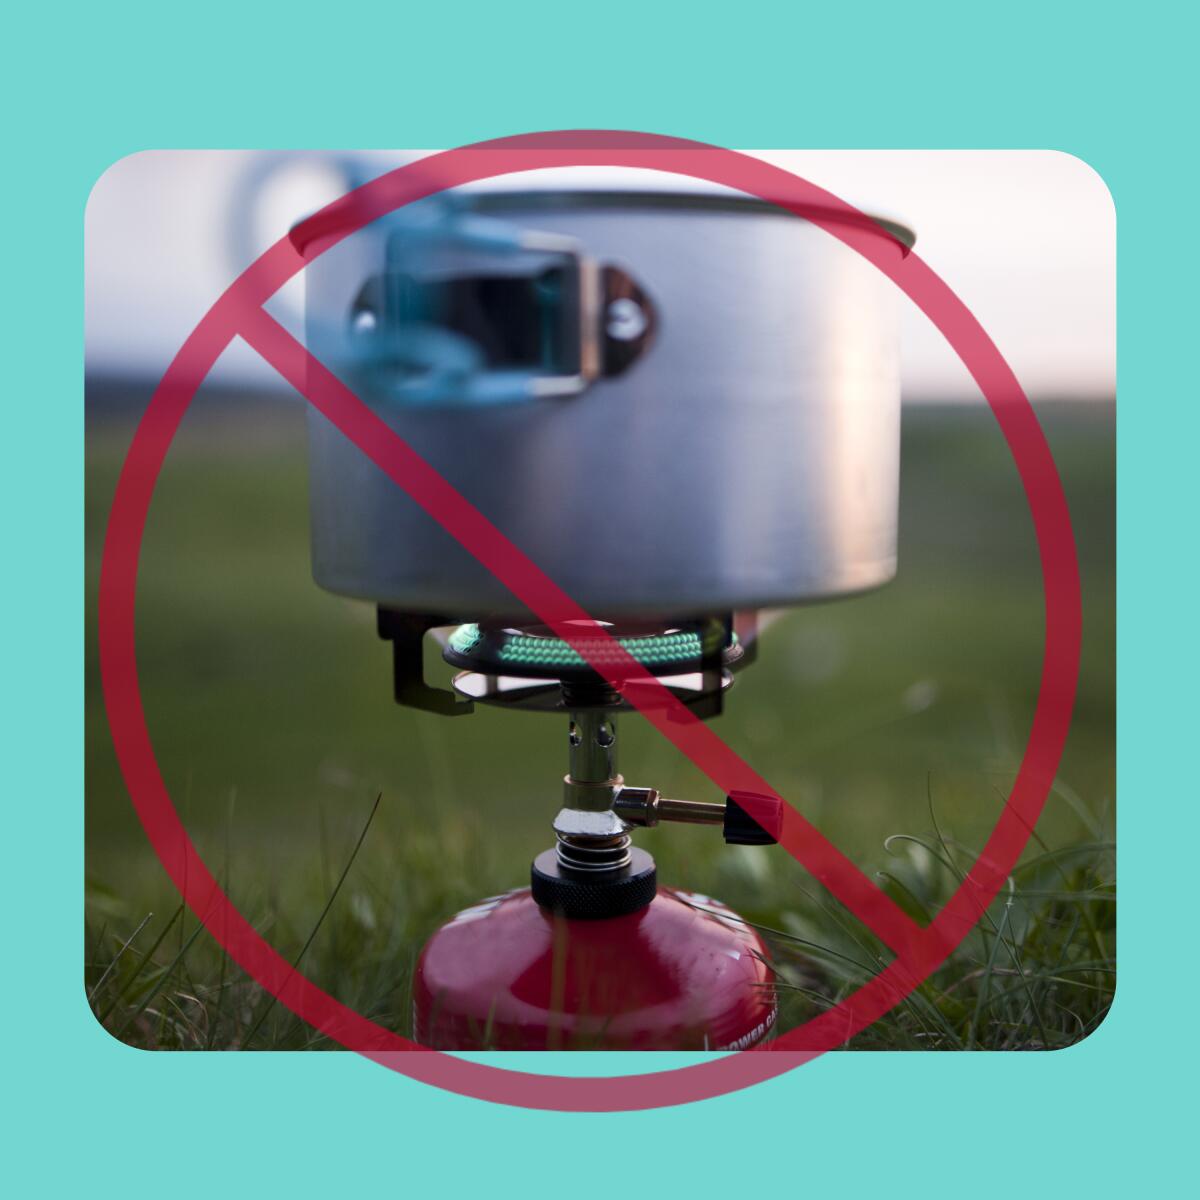 A camping stove with a red warning sign superimposed on it.